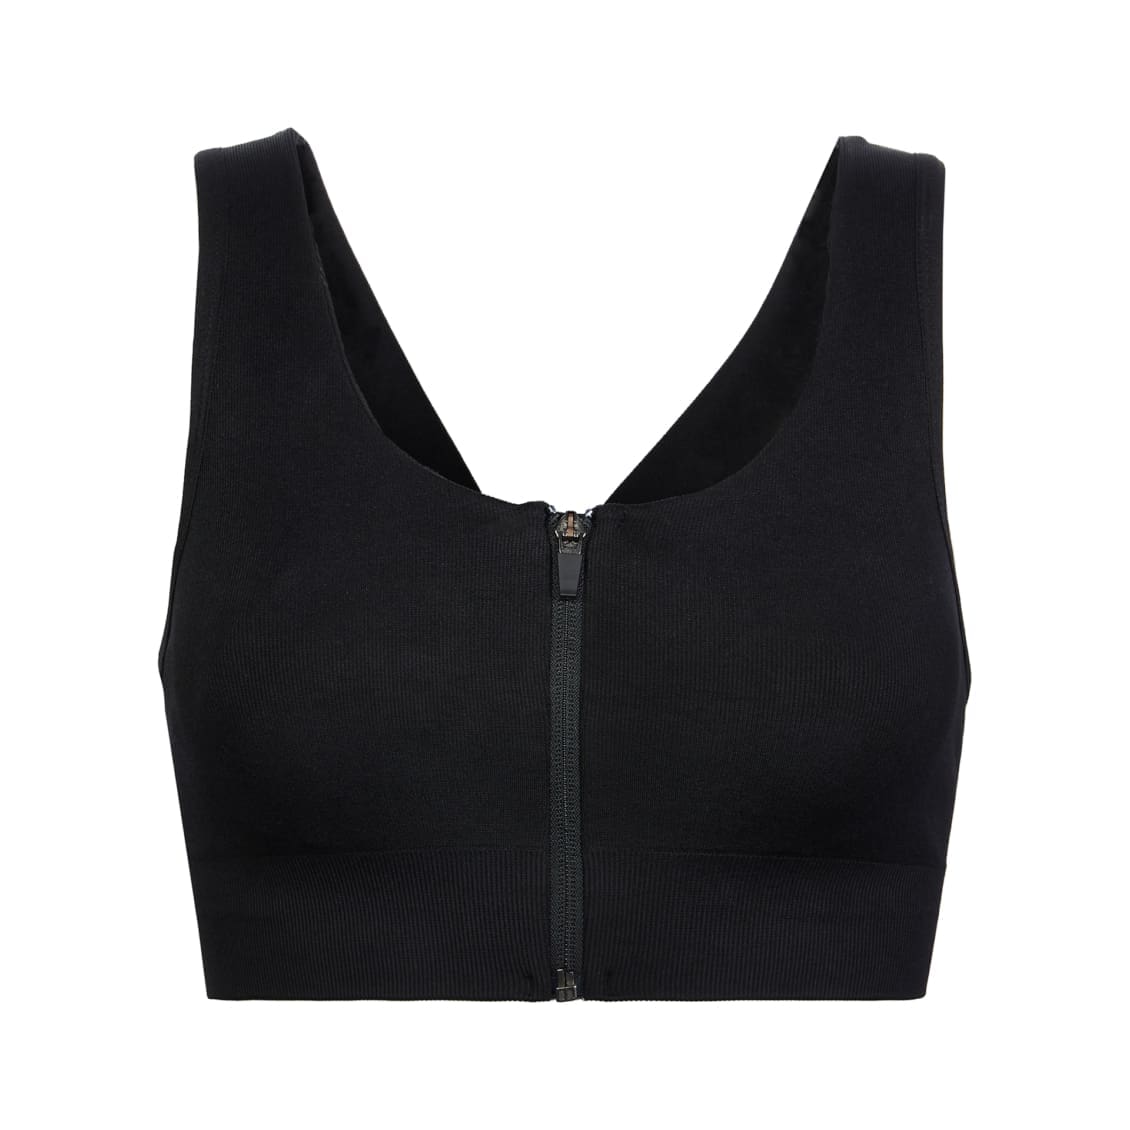 FEOYA Adjustable Sports Bra Zip Front Yoga Bra Top High Support Bra Workout  Padded s Black at  Women's Clothing store